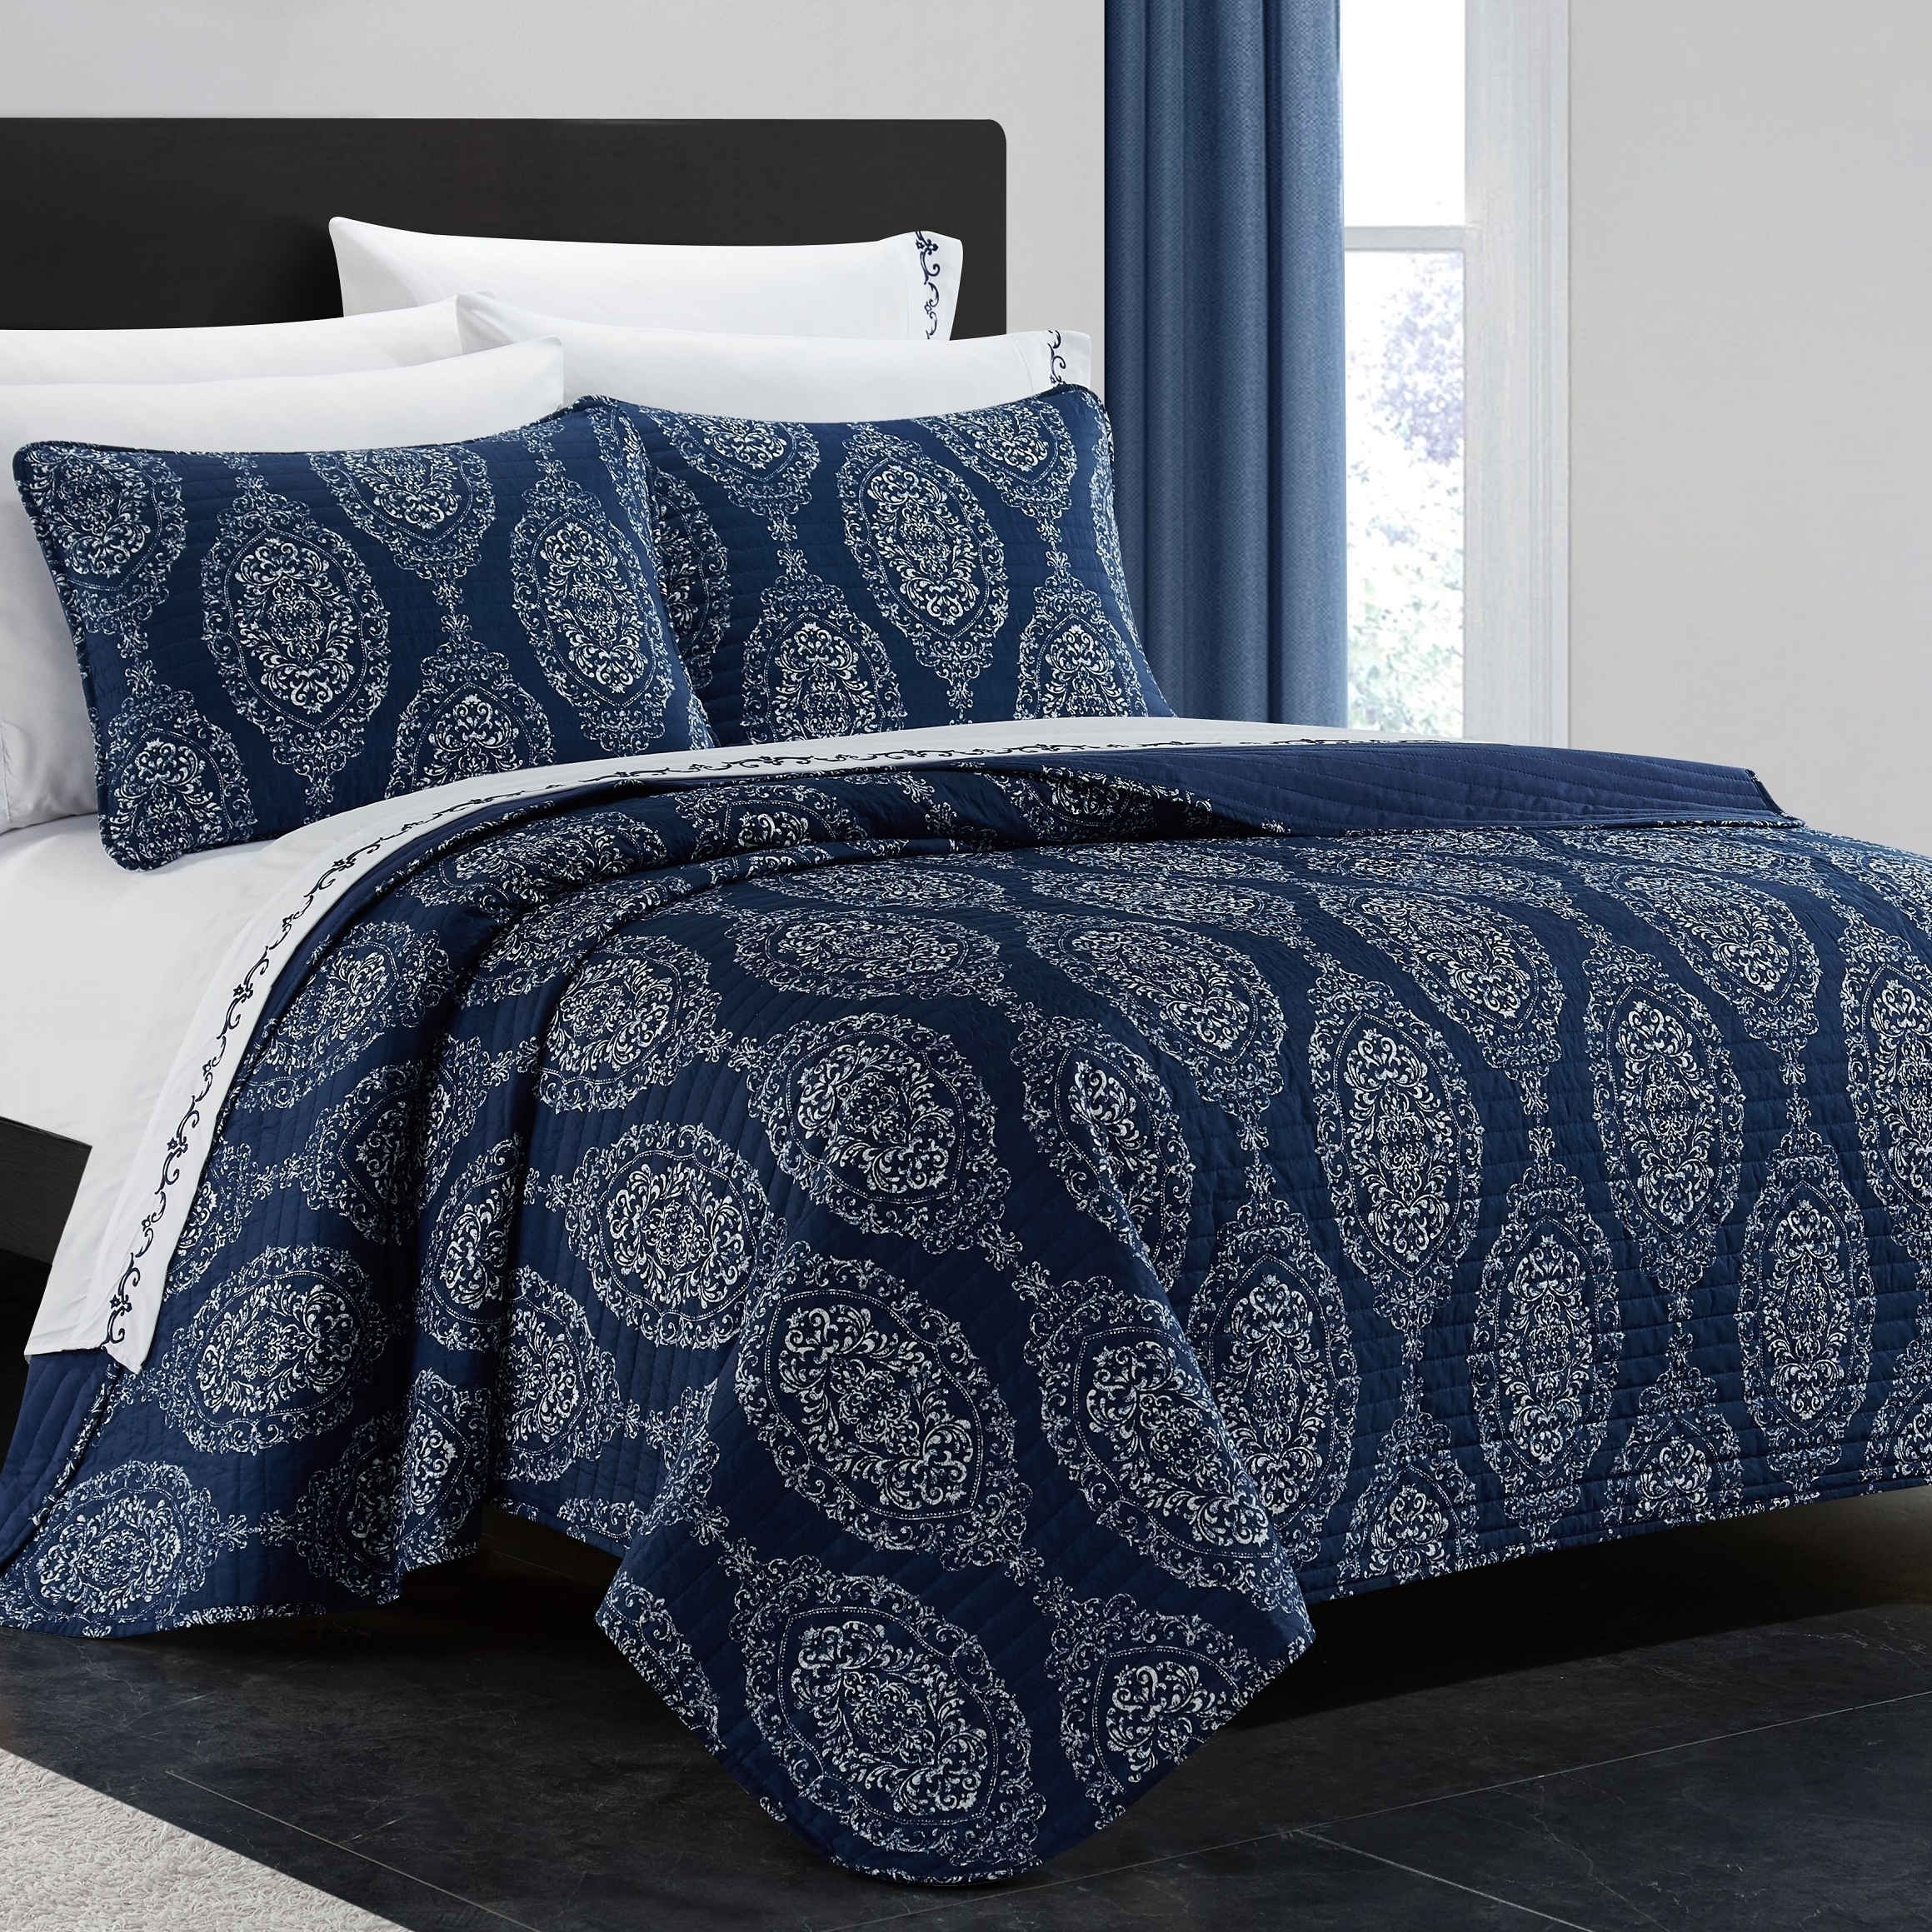 9 Or 6 Piece Quilt Set Medallion Or Floral Pattern Print Reversible Bed In A Bag - Navy, Full